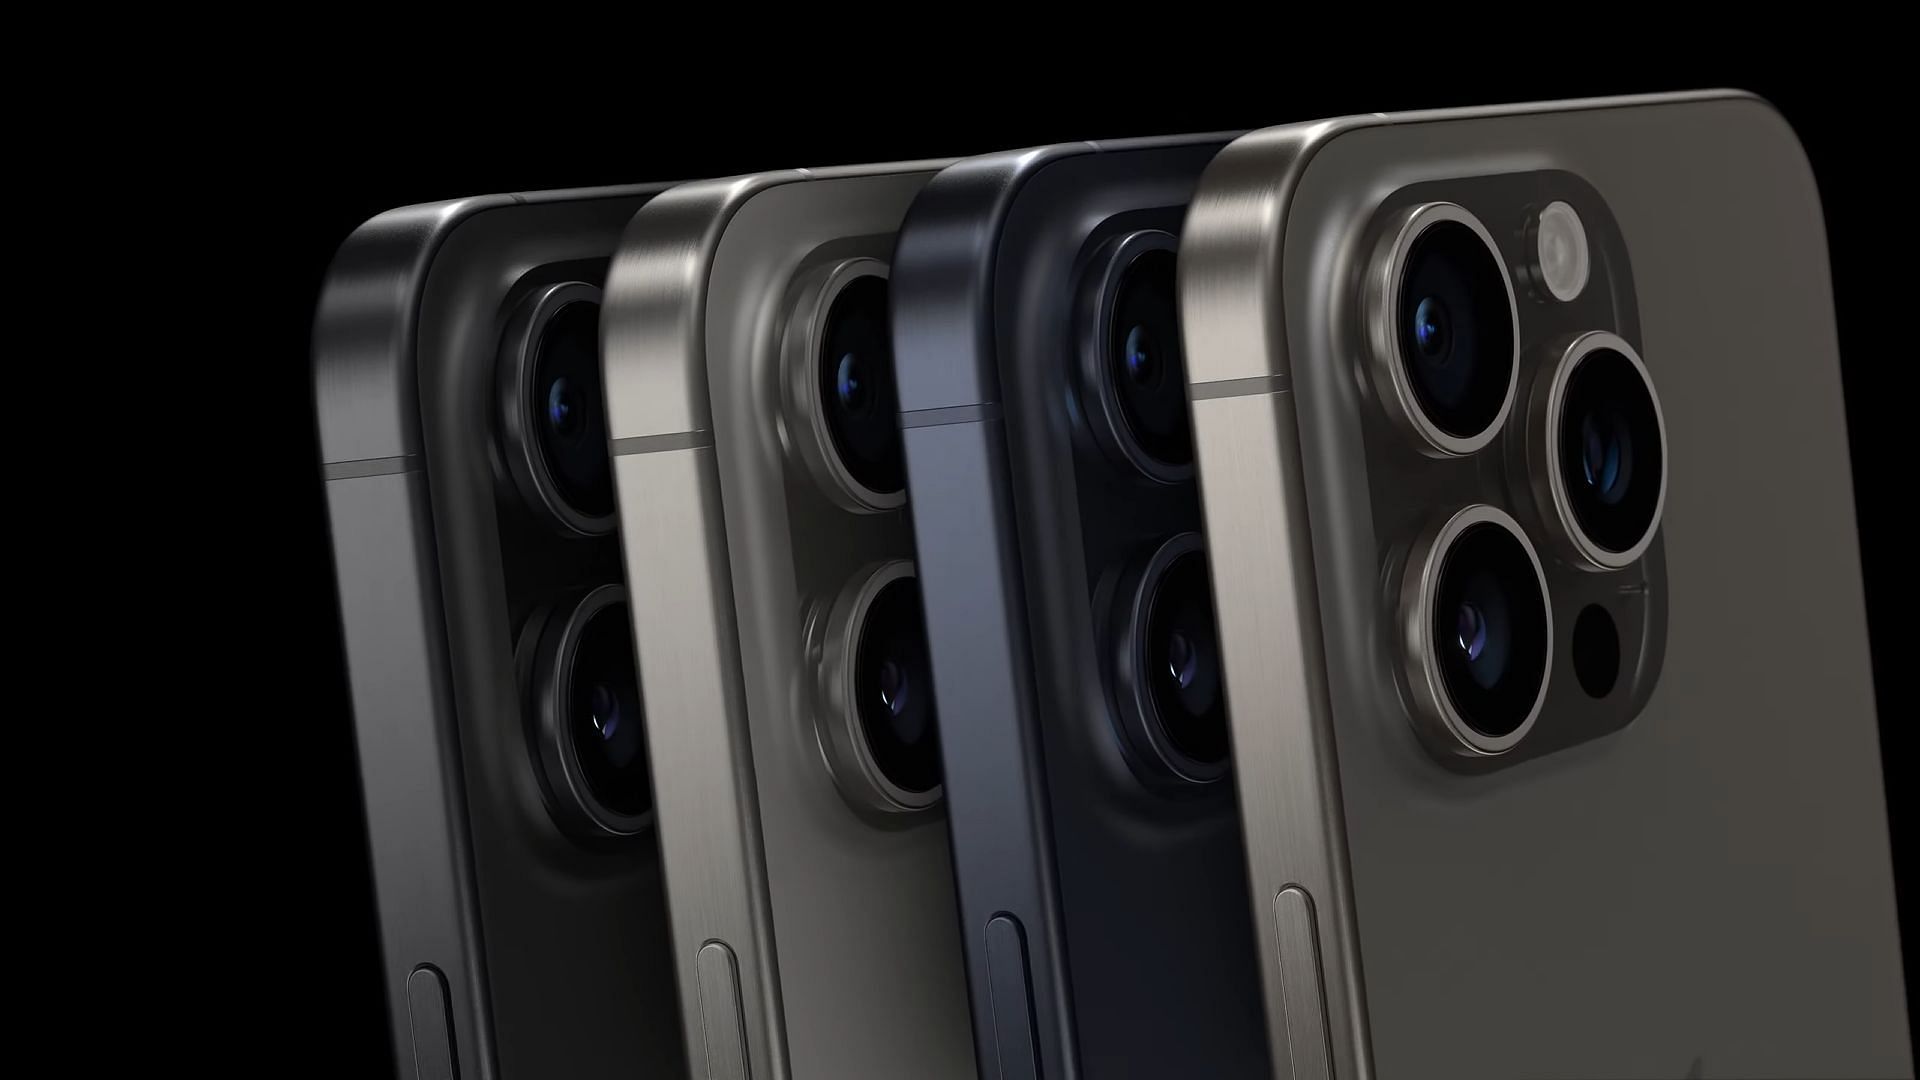 The 15 Pro models will come in four different colors (Image via Apple)